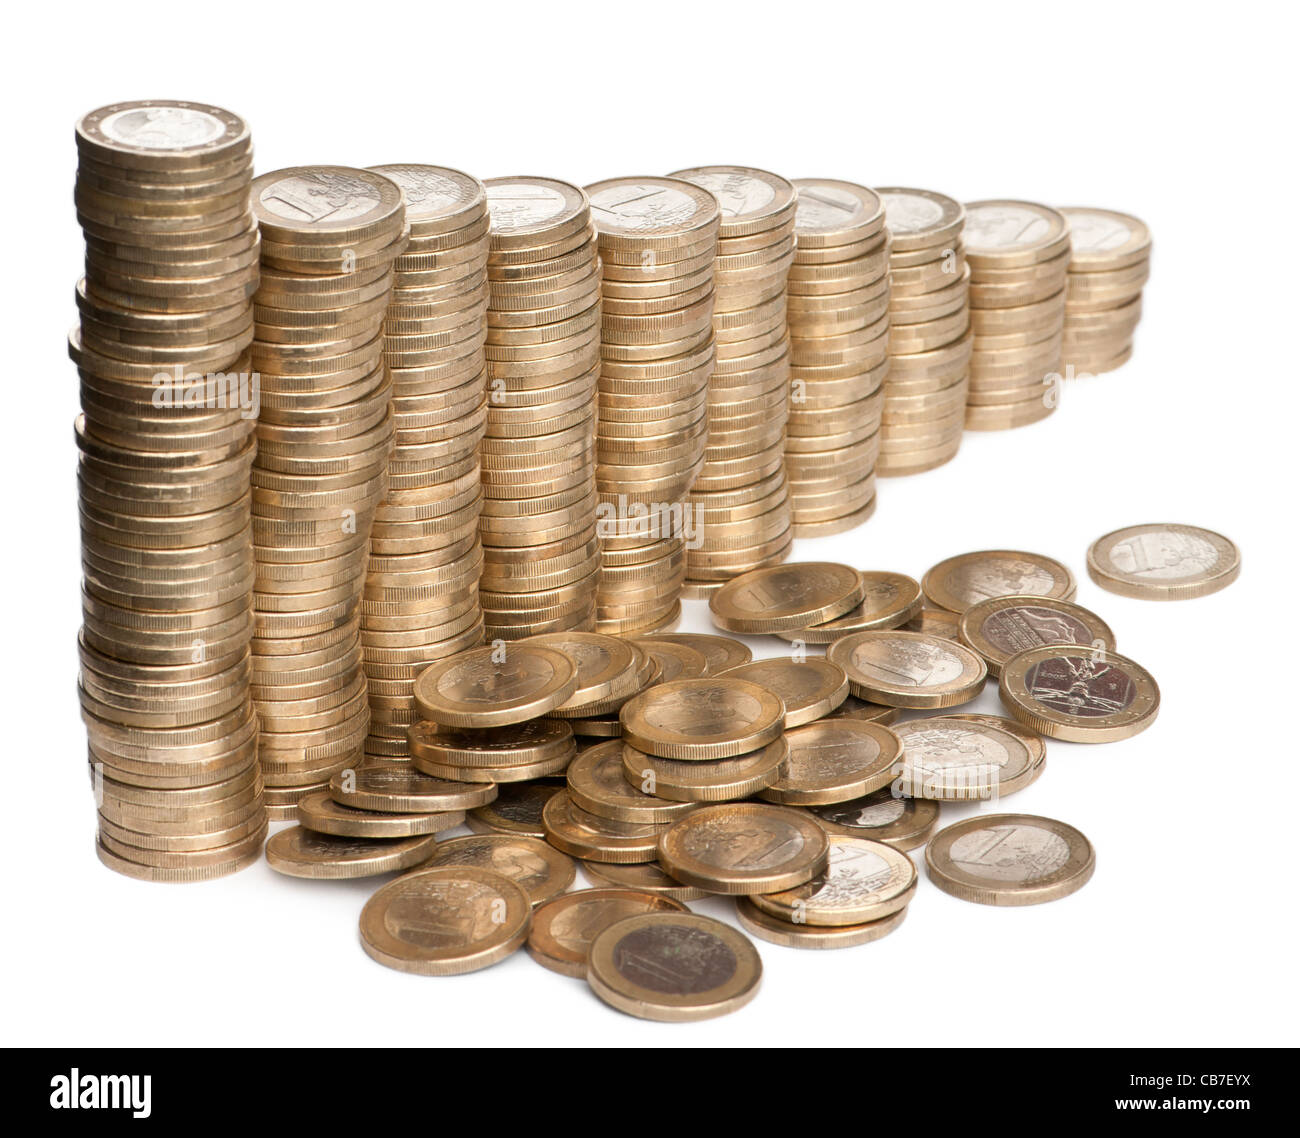 Stacks of 1 Euro Coins in front of white background Stock Photo